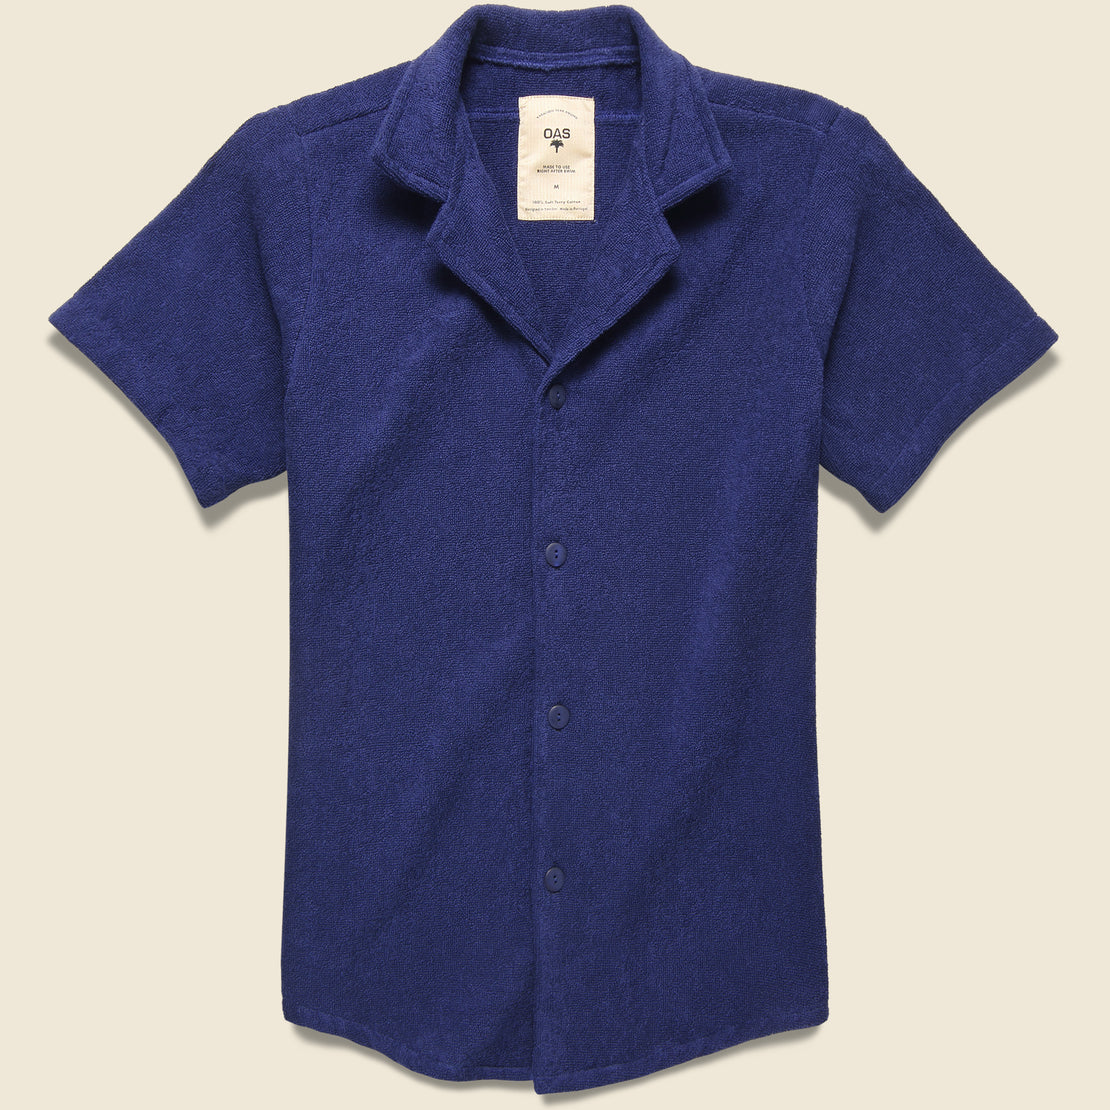 OAS Solid Terry Shirt - Navy